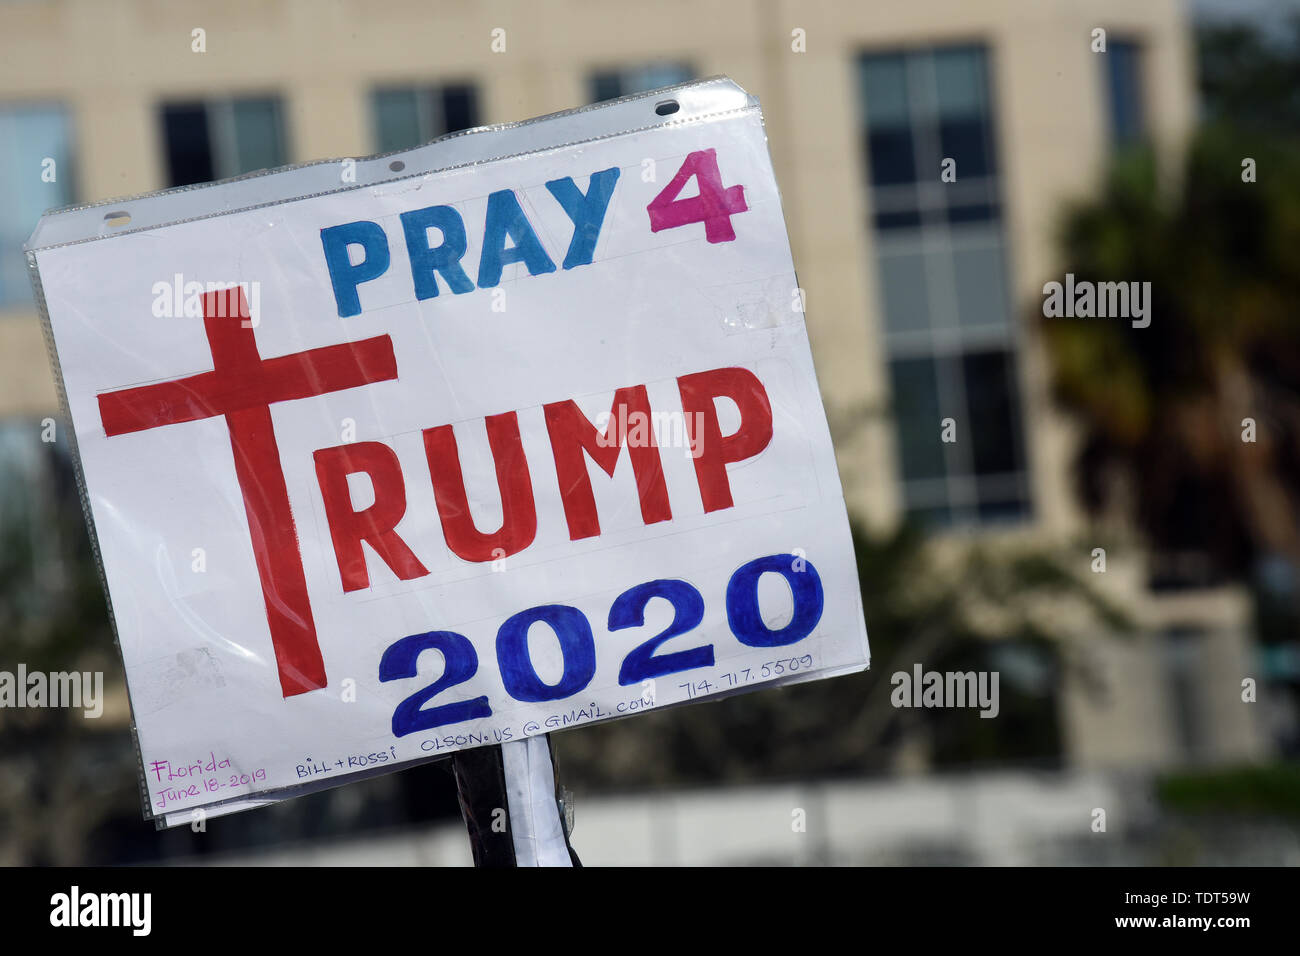 Orlando, Florida, USA. 18th June, 2019. A supporter of U.S. President Donald Trump holds a sign while waiting for a Make America Great Again rally at the Amway Center on June 18, 2019 in Orlando, Florida. The rally is billed as Trump's kick-off event for his campaign for re-election in 2020. (Paul Hennessy/Alamy) Credit: Paul Hennessy/Alamy Live News Stock Photo